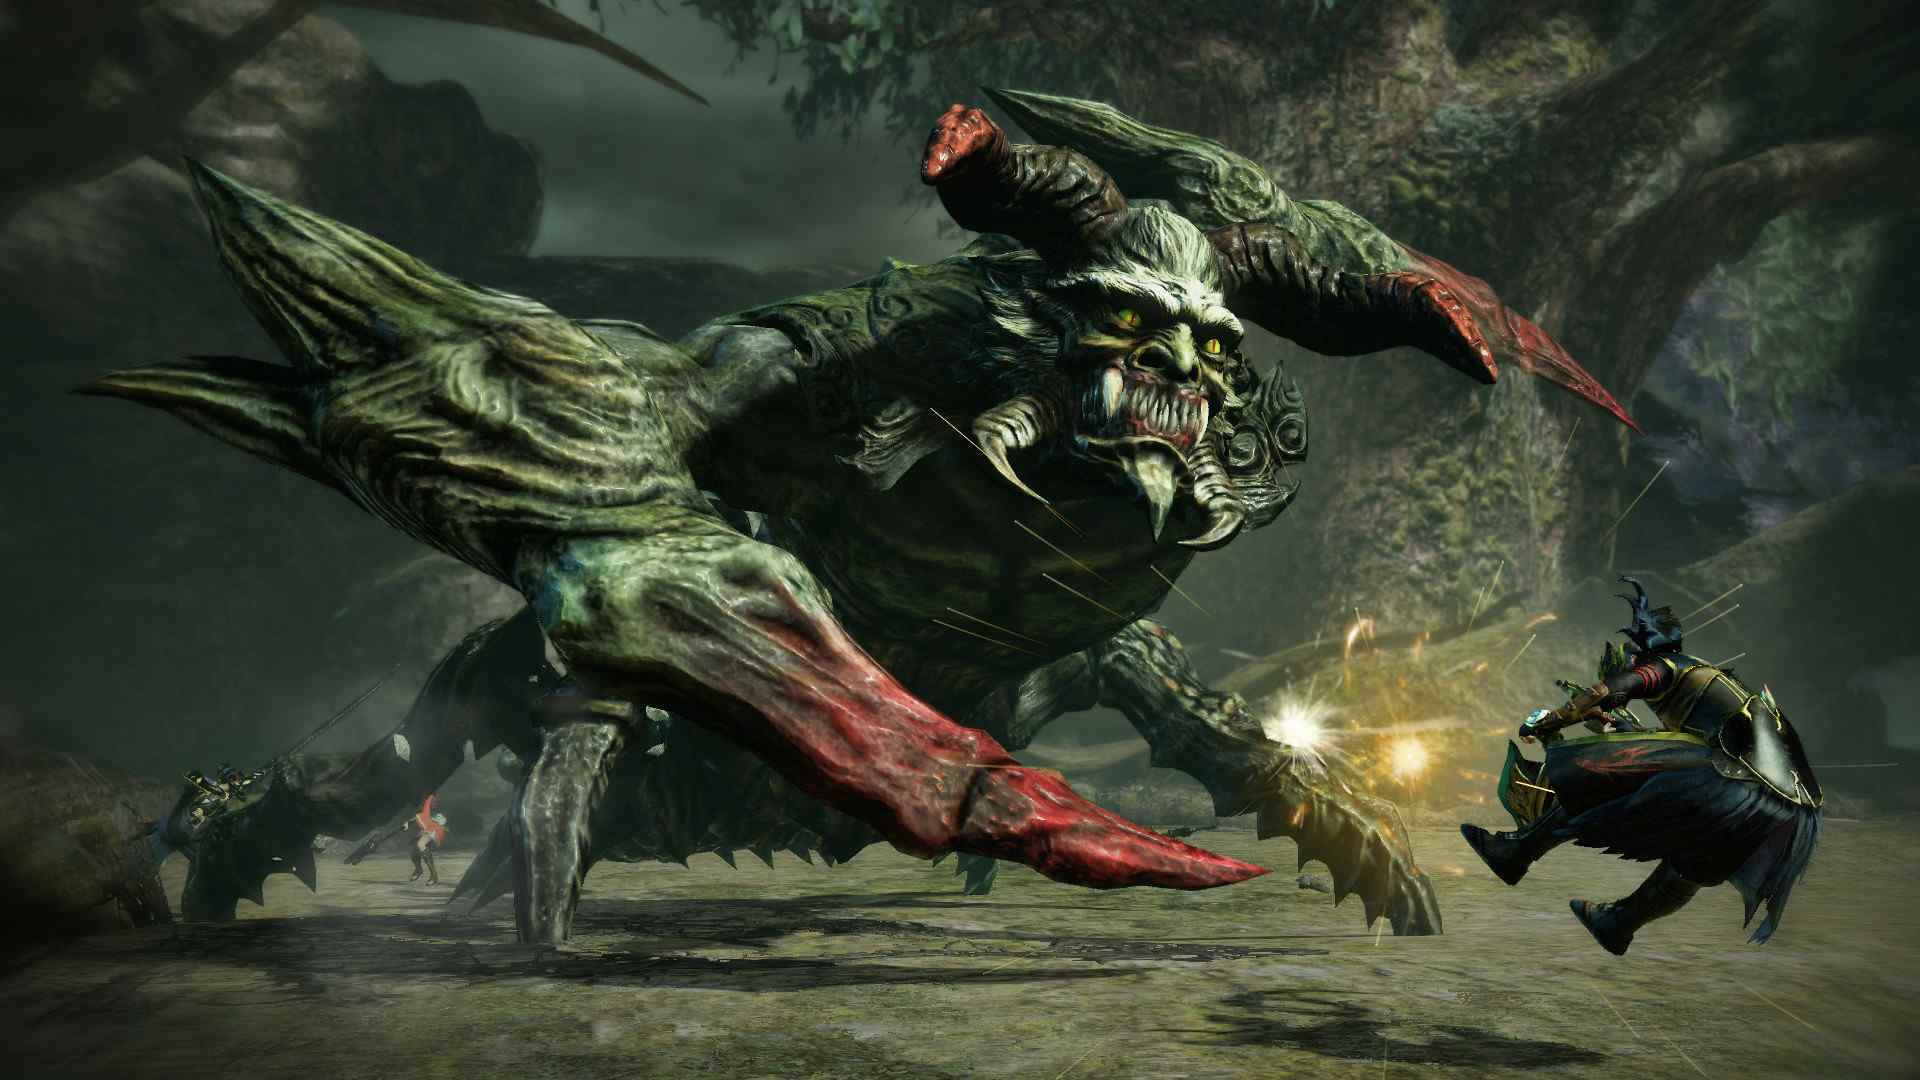 Toukiden 2 is an engaging action RPG where players hunt down hordes of demons in a beautifully realized, open-world setting, and features a captivating narrative.